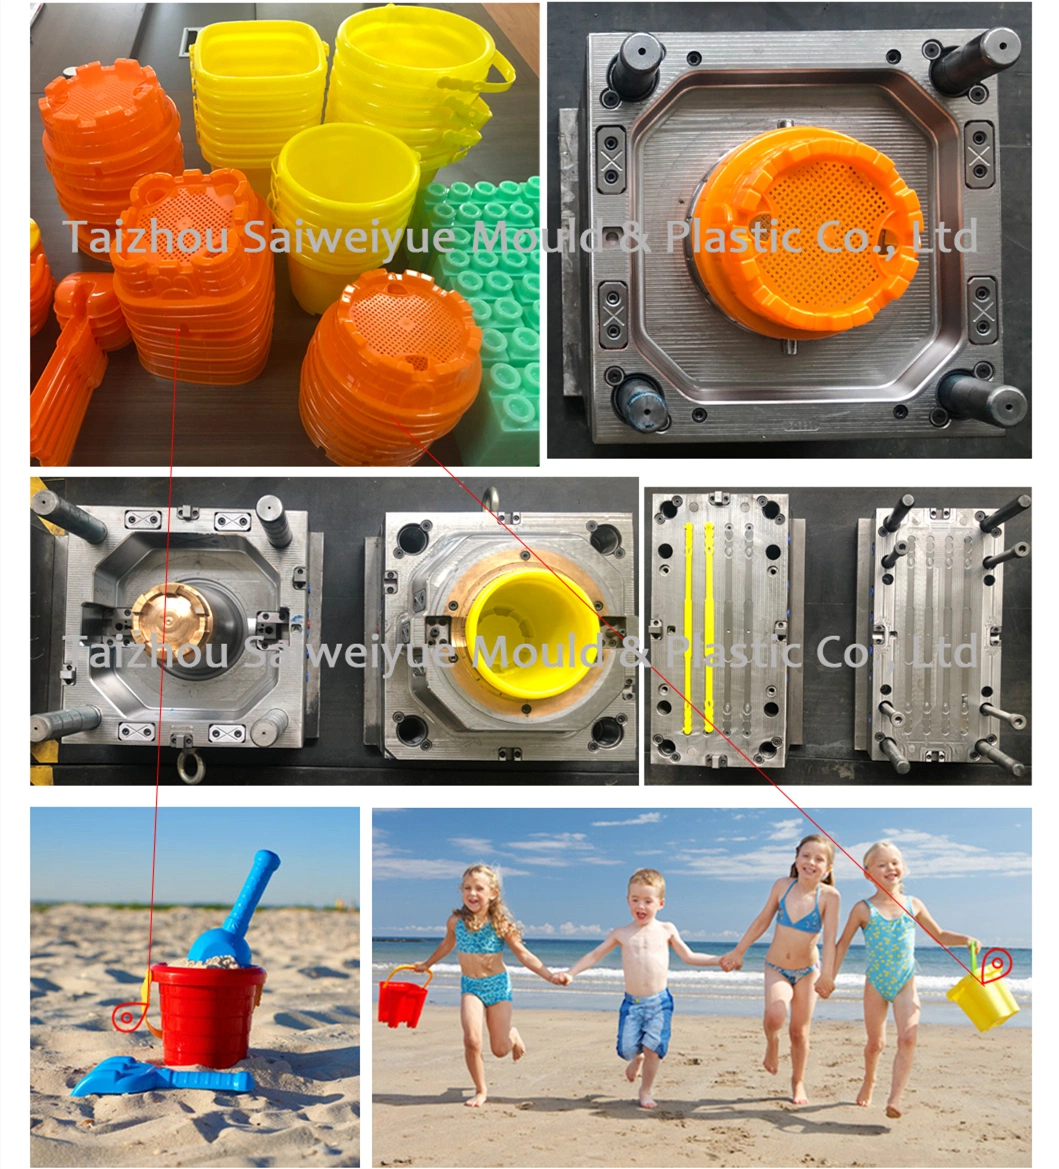 Plastic Water Container Sand Pail Mold Child Summer Beach Toys Injection Mould